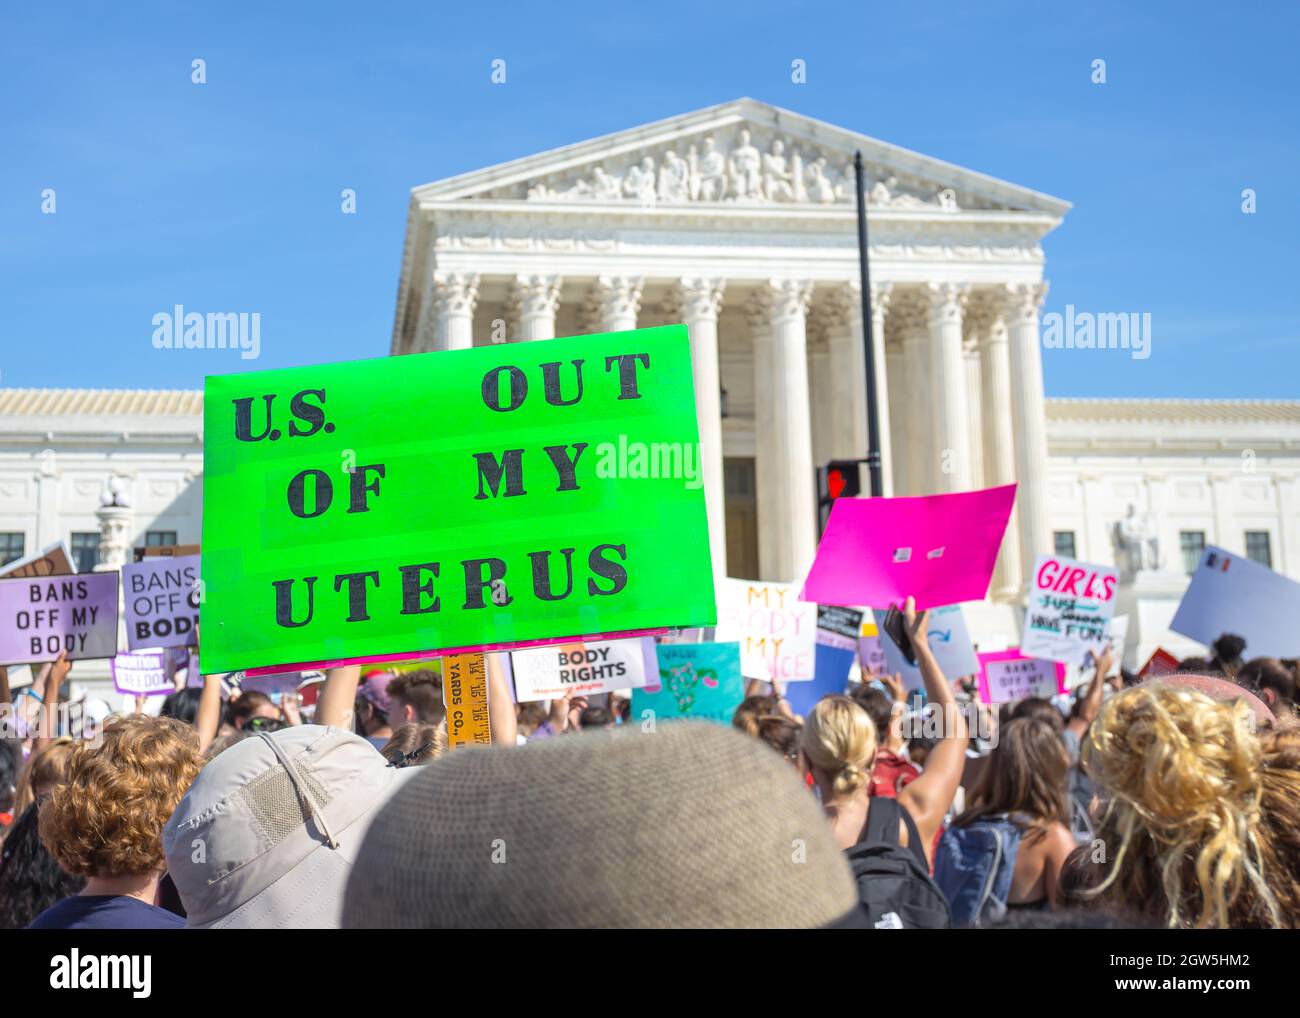 Washington, D.C., USA. October 2, 2021. Thousands of people gather in Washington, D.C. for the Women's March Rally for Abortion Justice to protest against new restrictive abortion laws in Texas and the potential overturning of the Roe v. Wade Supreme Court Case.  Credit: Kalen Martin/Alamy Live News Stock Photo